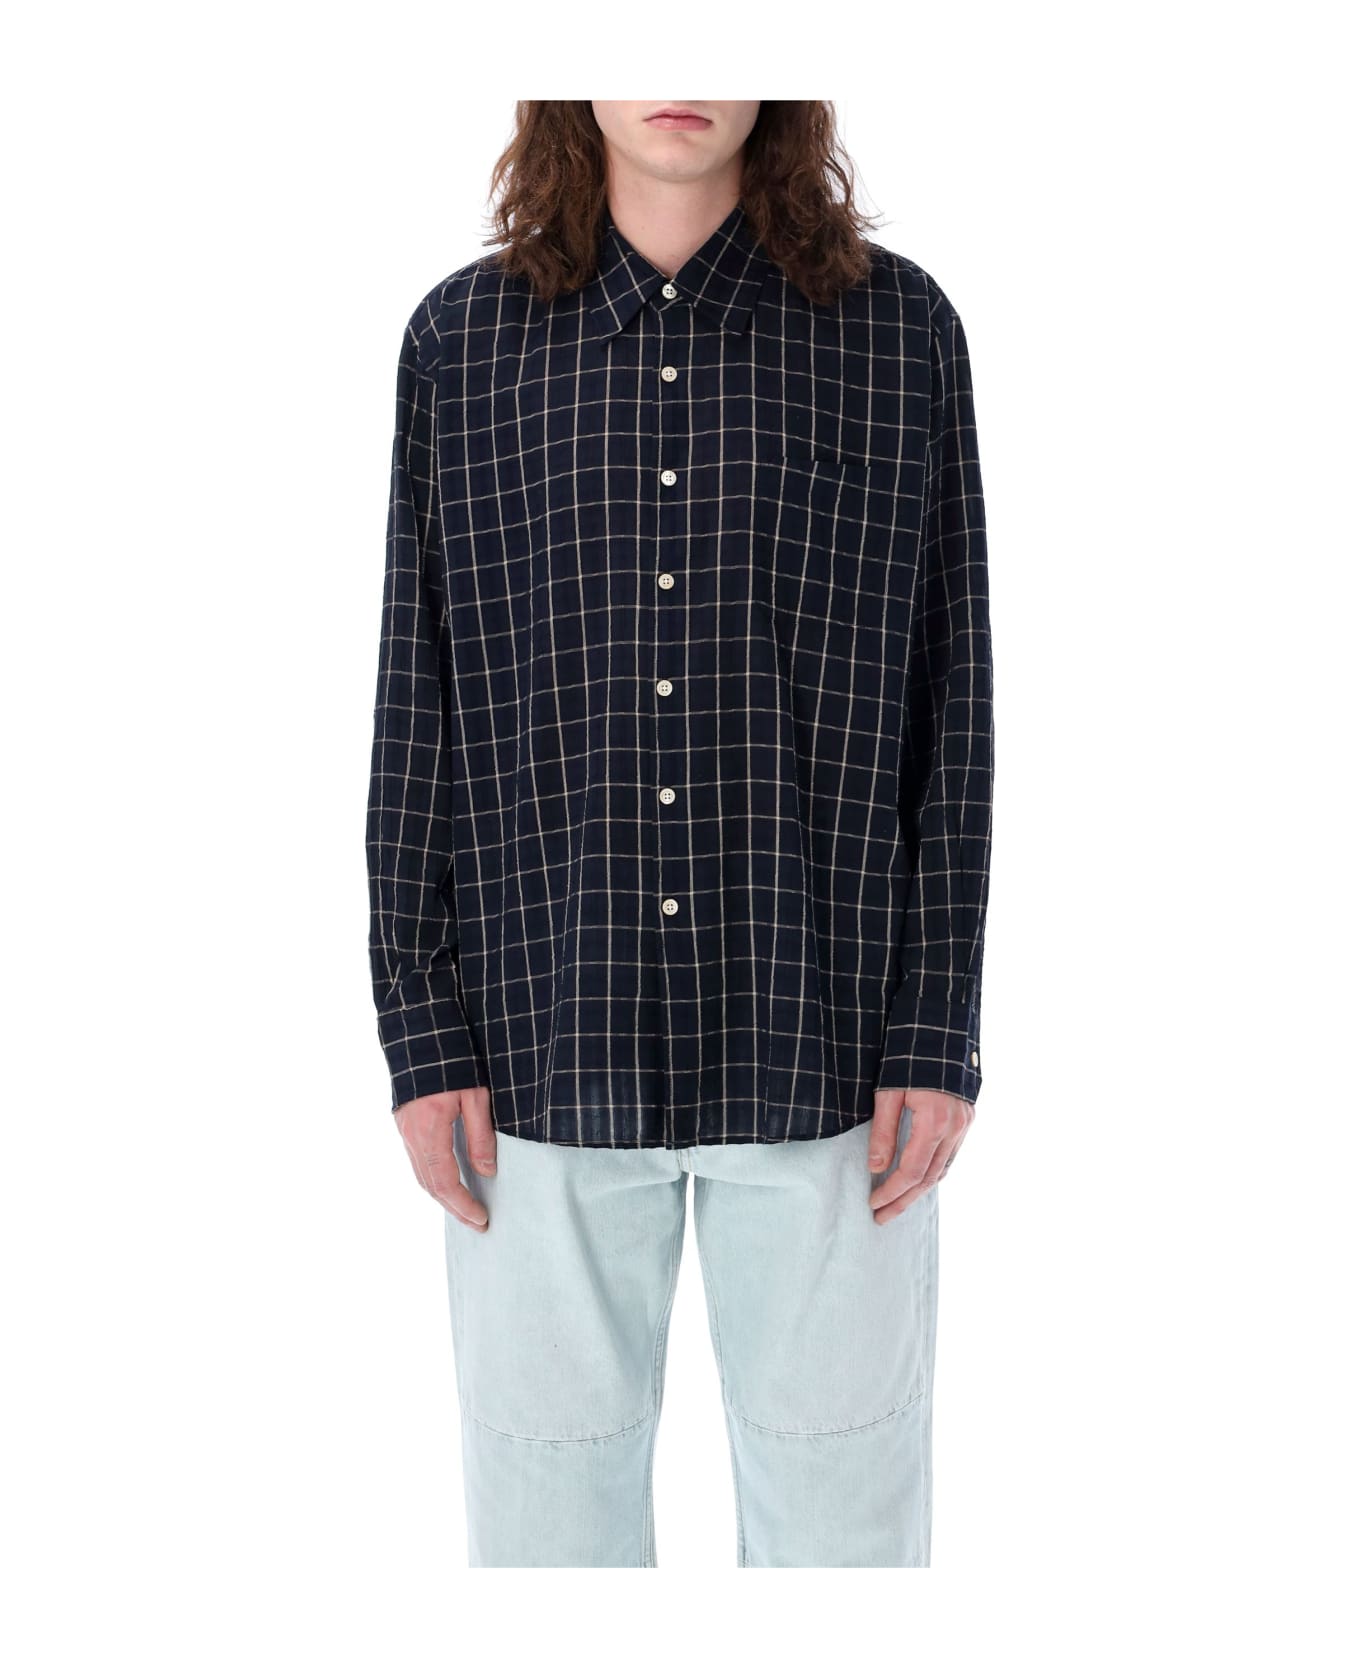 Our Legacy Above Shirt - DARK MEDITERIAN CHECK シャツ